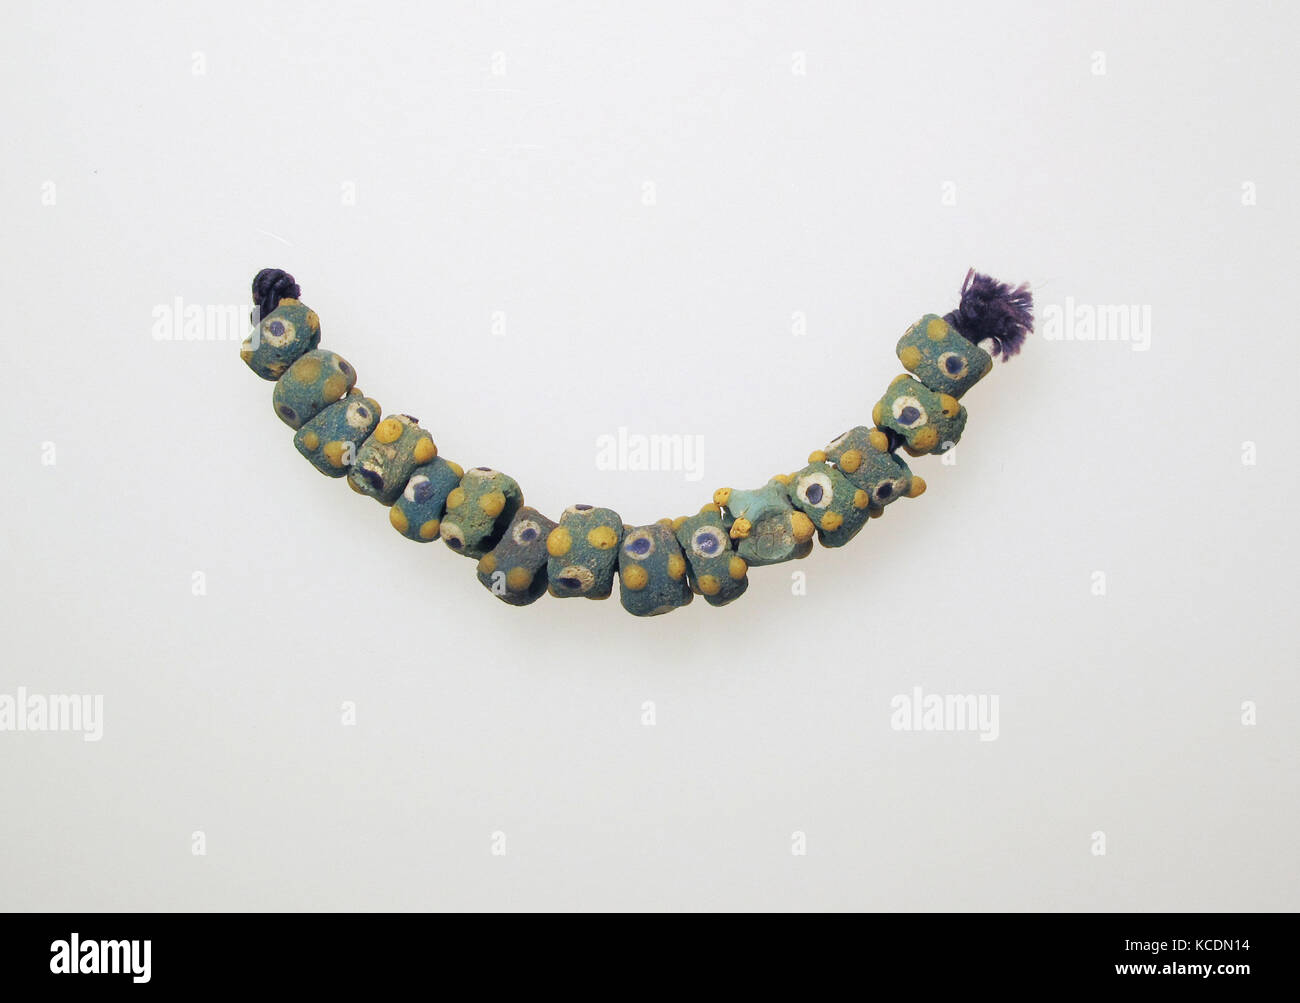 Beads, 16, Glass, Other: 4 7/16 in. (11.3 cm), Glass Stock Photo